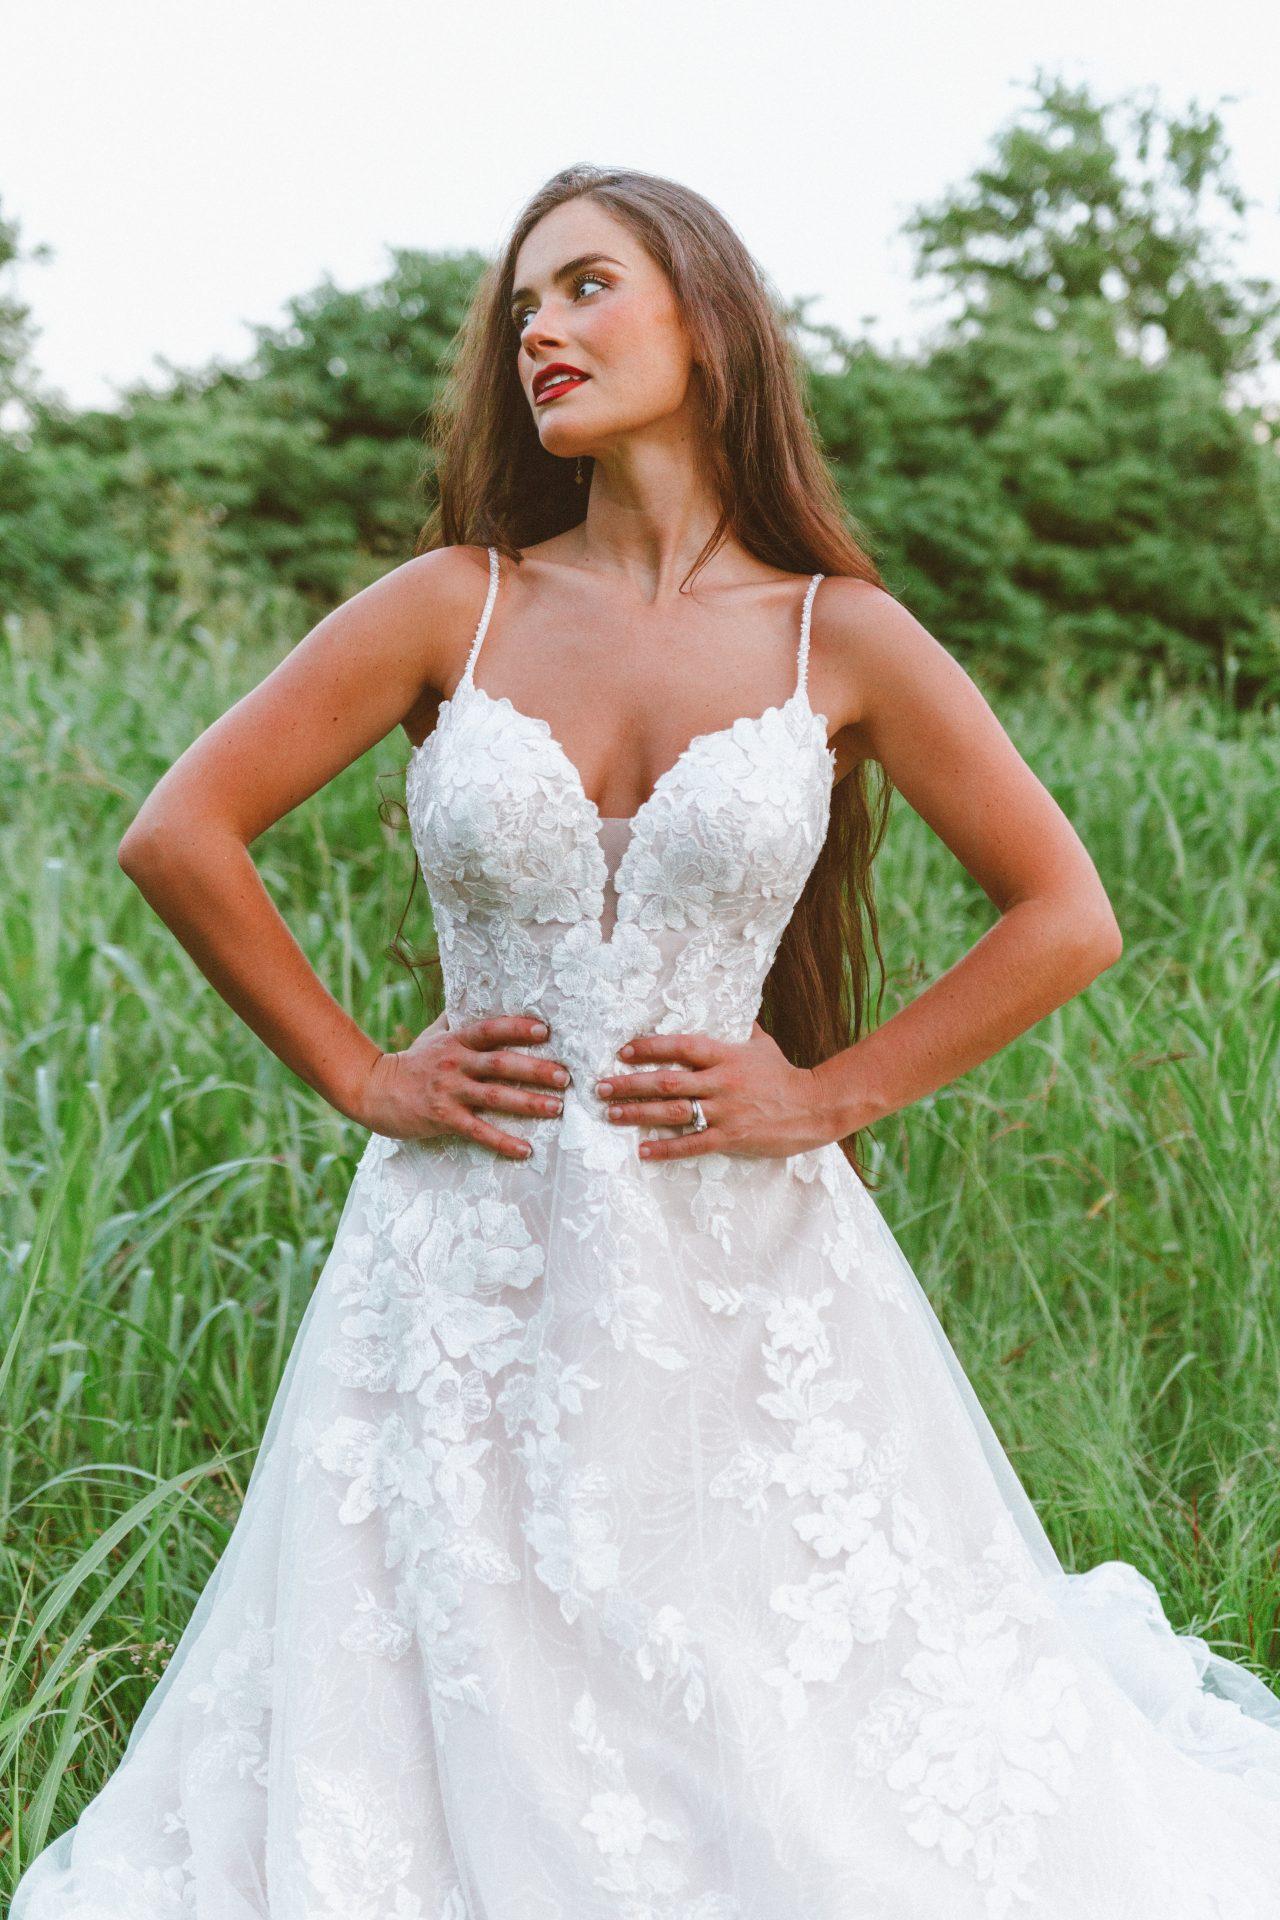 How To Decide What Color Wedding Dress To Order Image